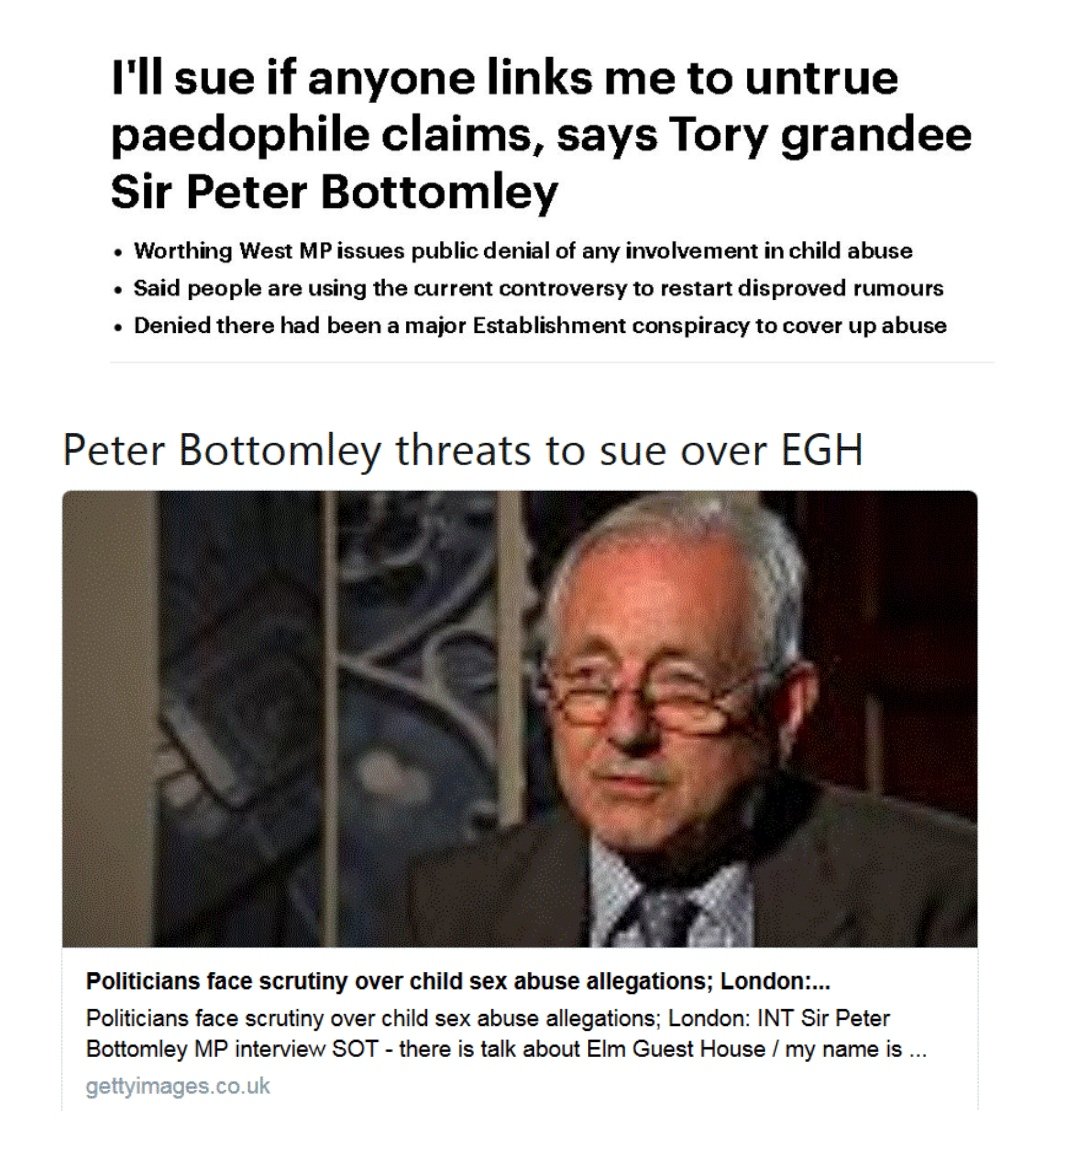 But most interestingly of all is that Kitty Ussher is the niece of Tory MP Peter Bottomley and Tory peer Virginia Bottomley. Yes, Peter whose name is linked to Elm Guest House and Melanie Klein and Virginia who covered up the Peter Righton report.  https://spotlightonabuse.wordpress.com/2013/11/18/virginia-bottomley-and-the-peter-righton-report/